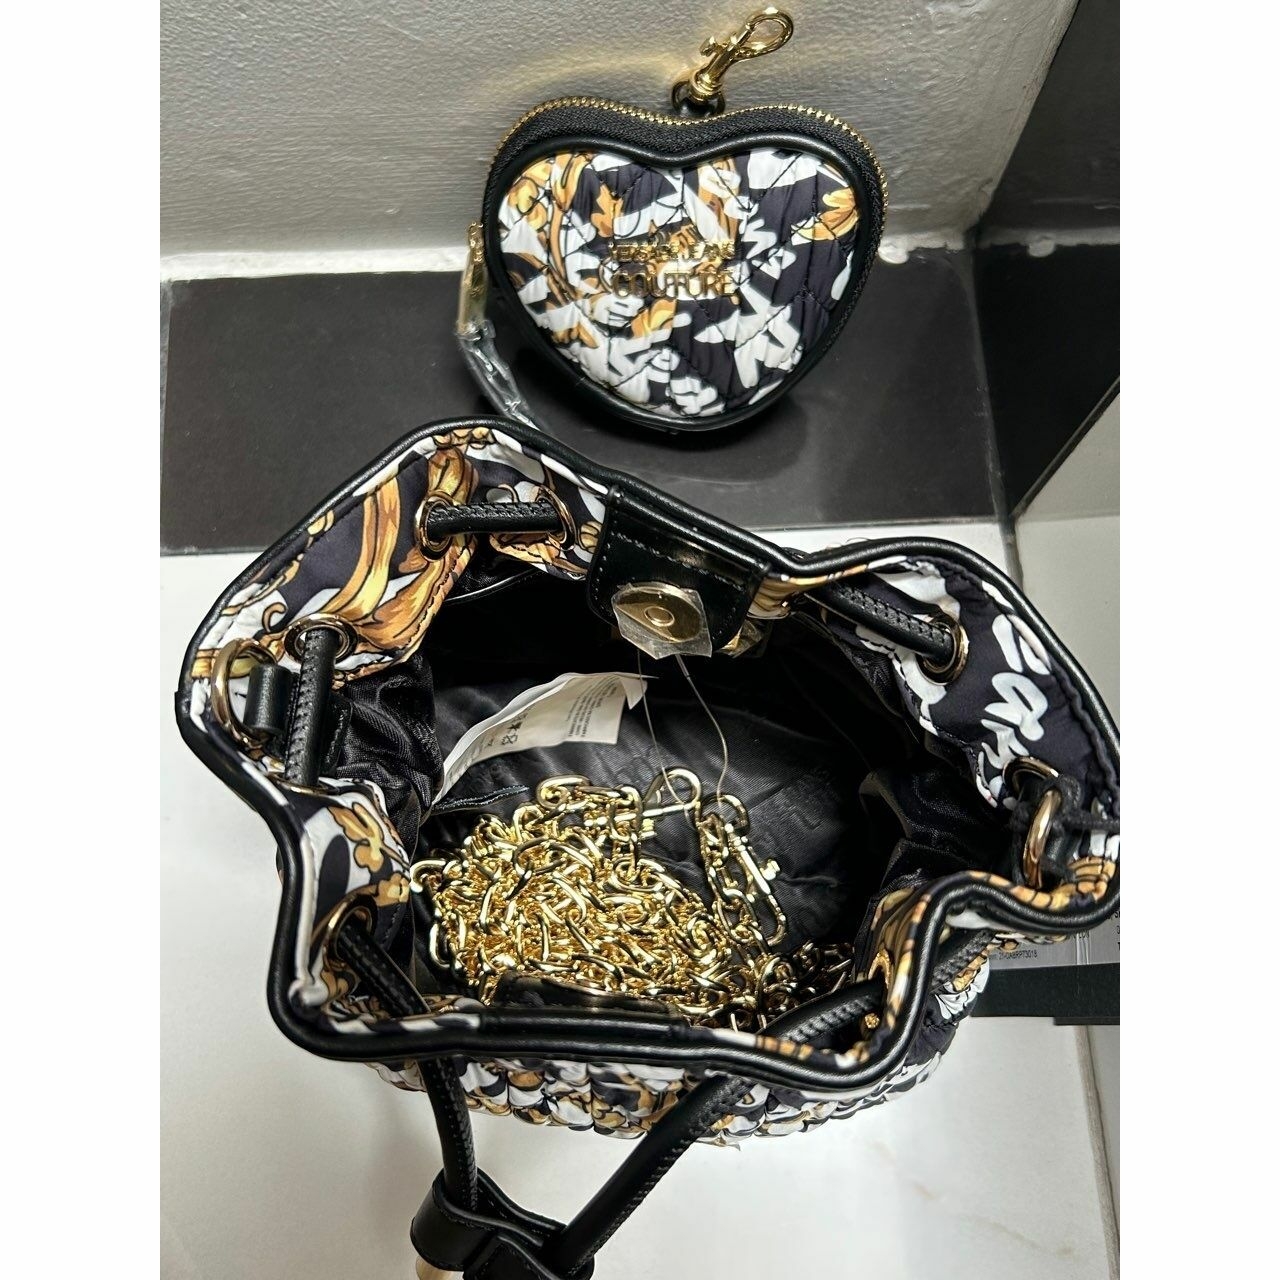 Versace Jeans Couture Multi Sling Bag Signature